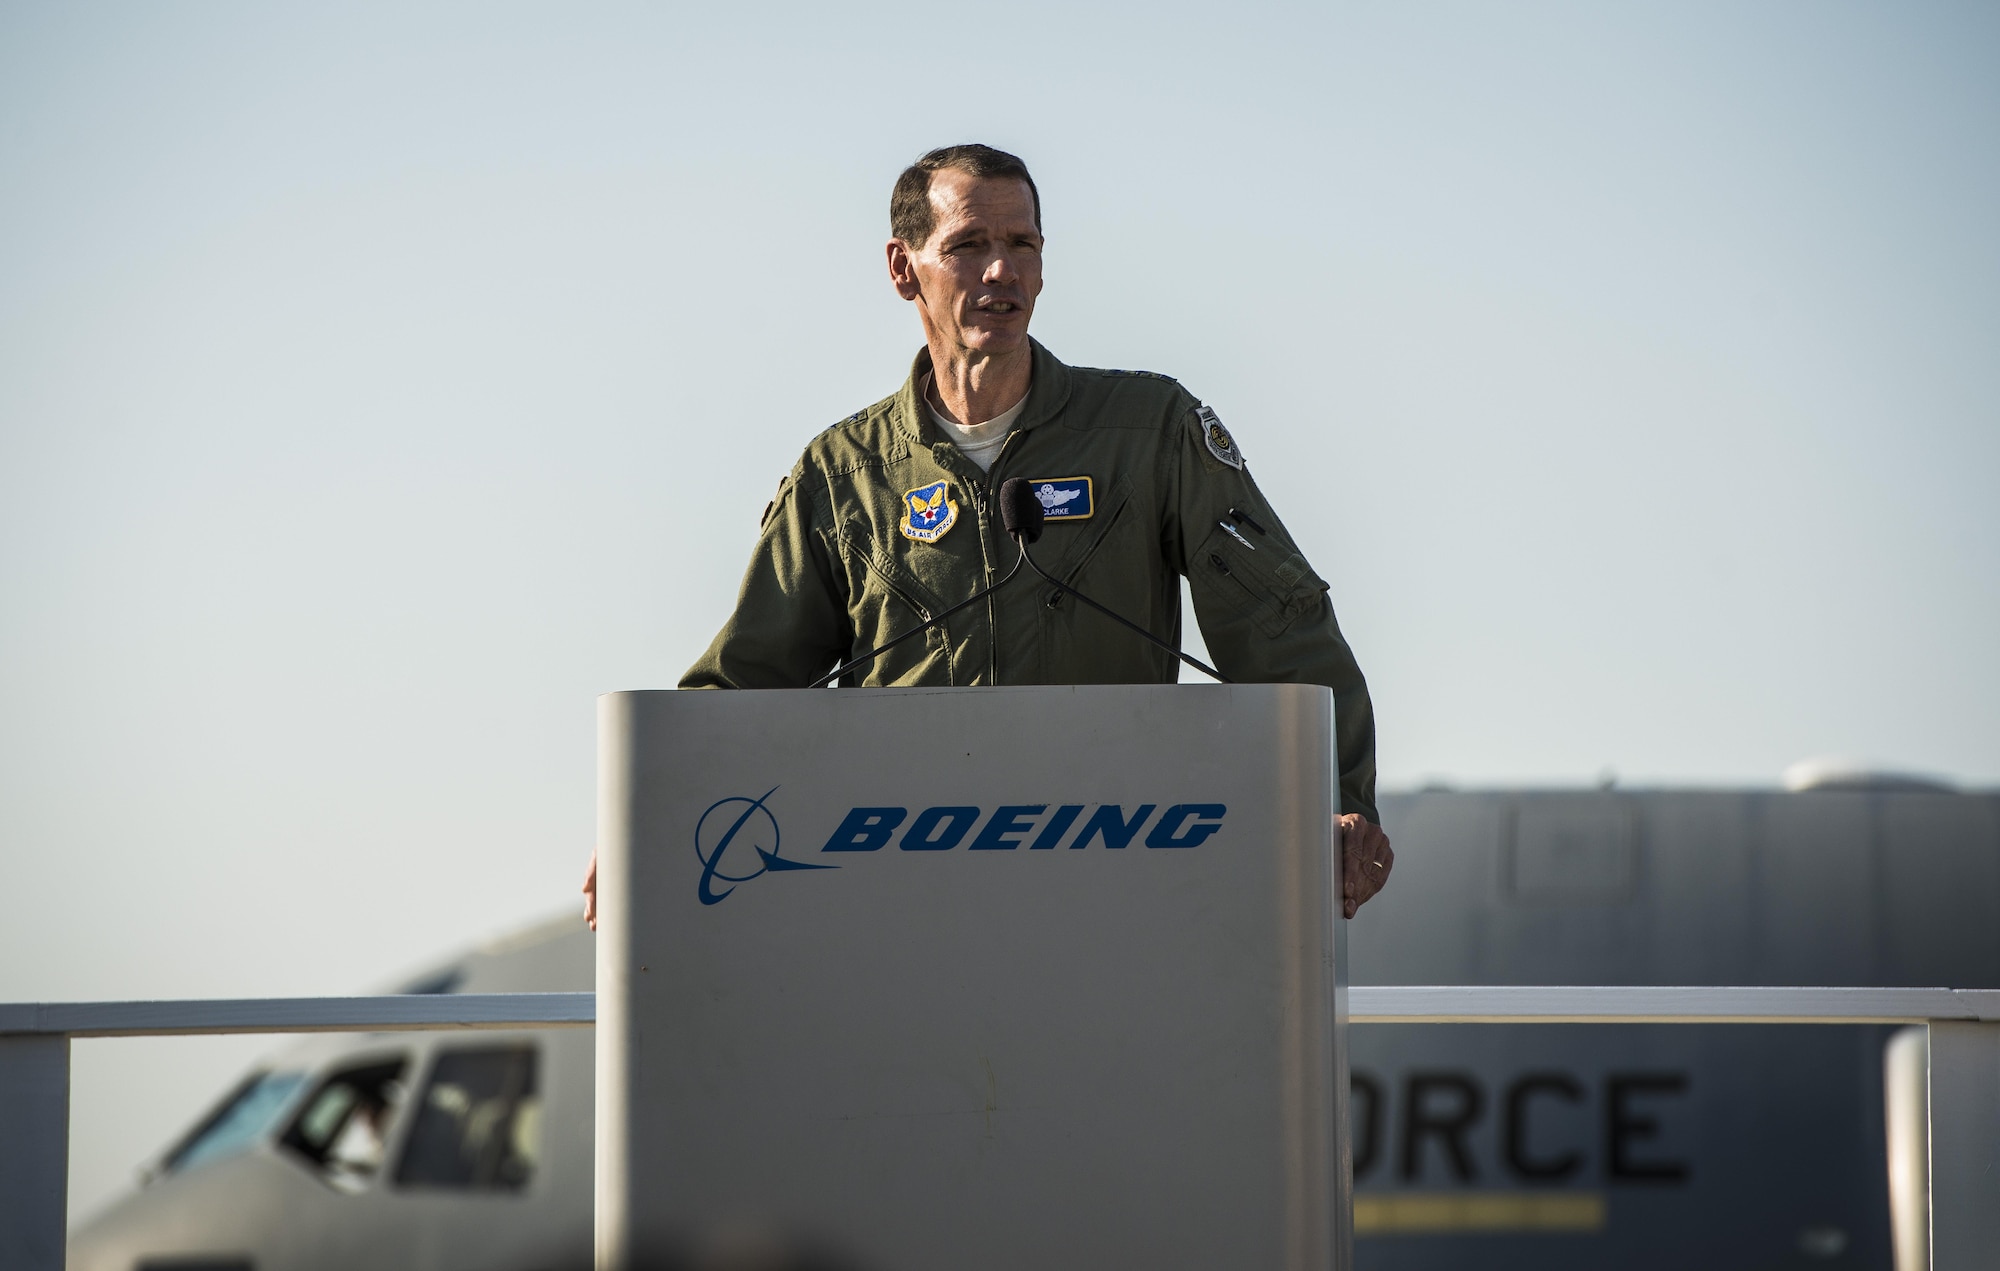 Lt. Gen. Stanley Clarke, Air National Guard director, speaks to Boeing employees at the final U.S. Air Force C-17 Globemaster III, P-223, delivery ceremony Sept. 12, 2013, at Long Beach, Calif.